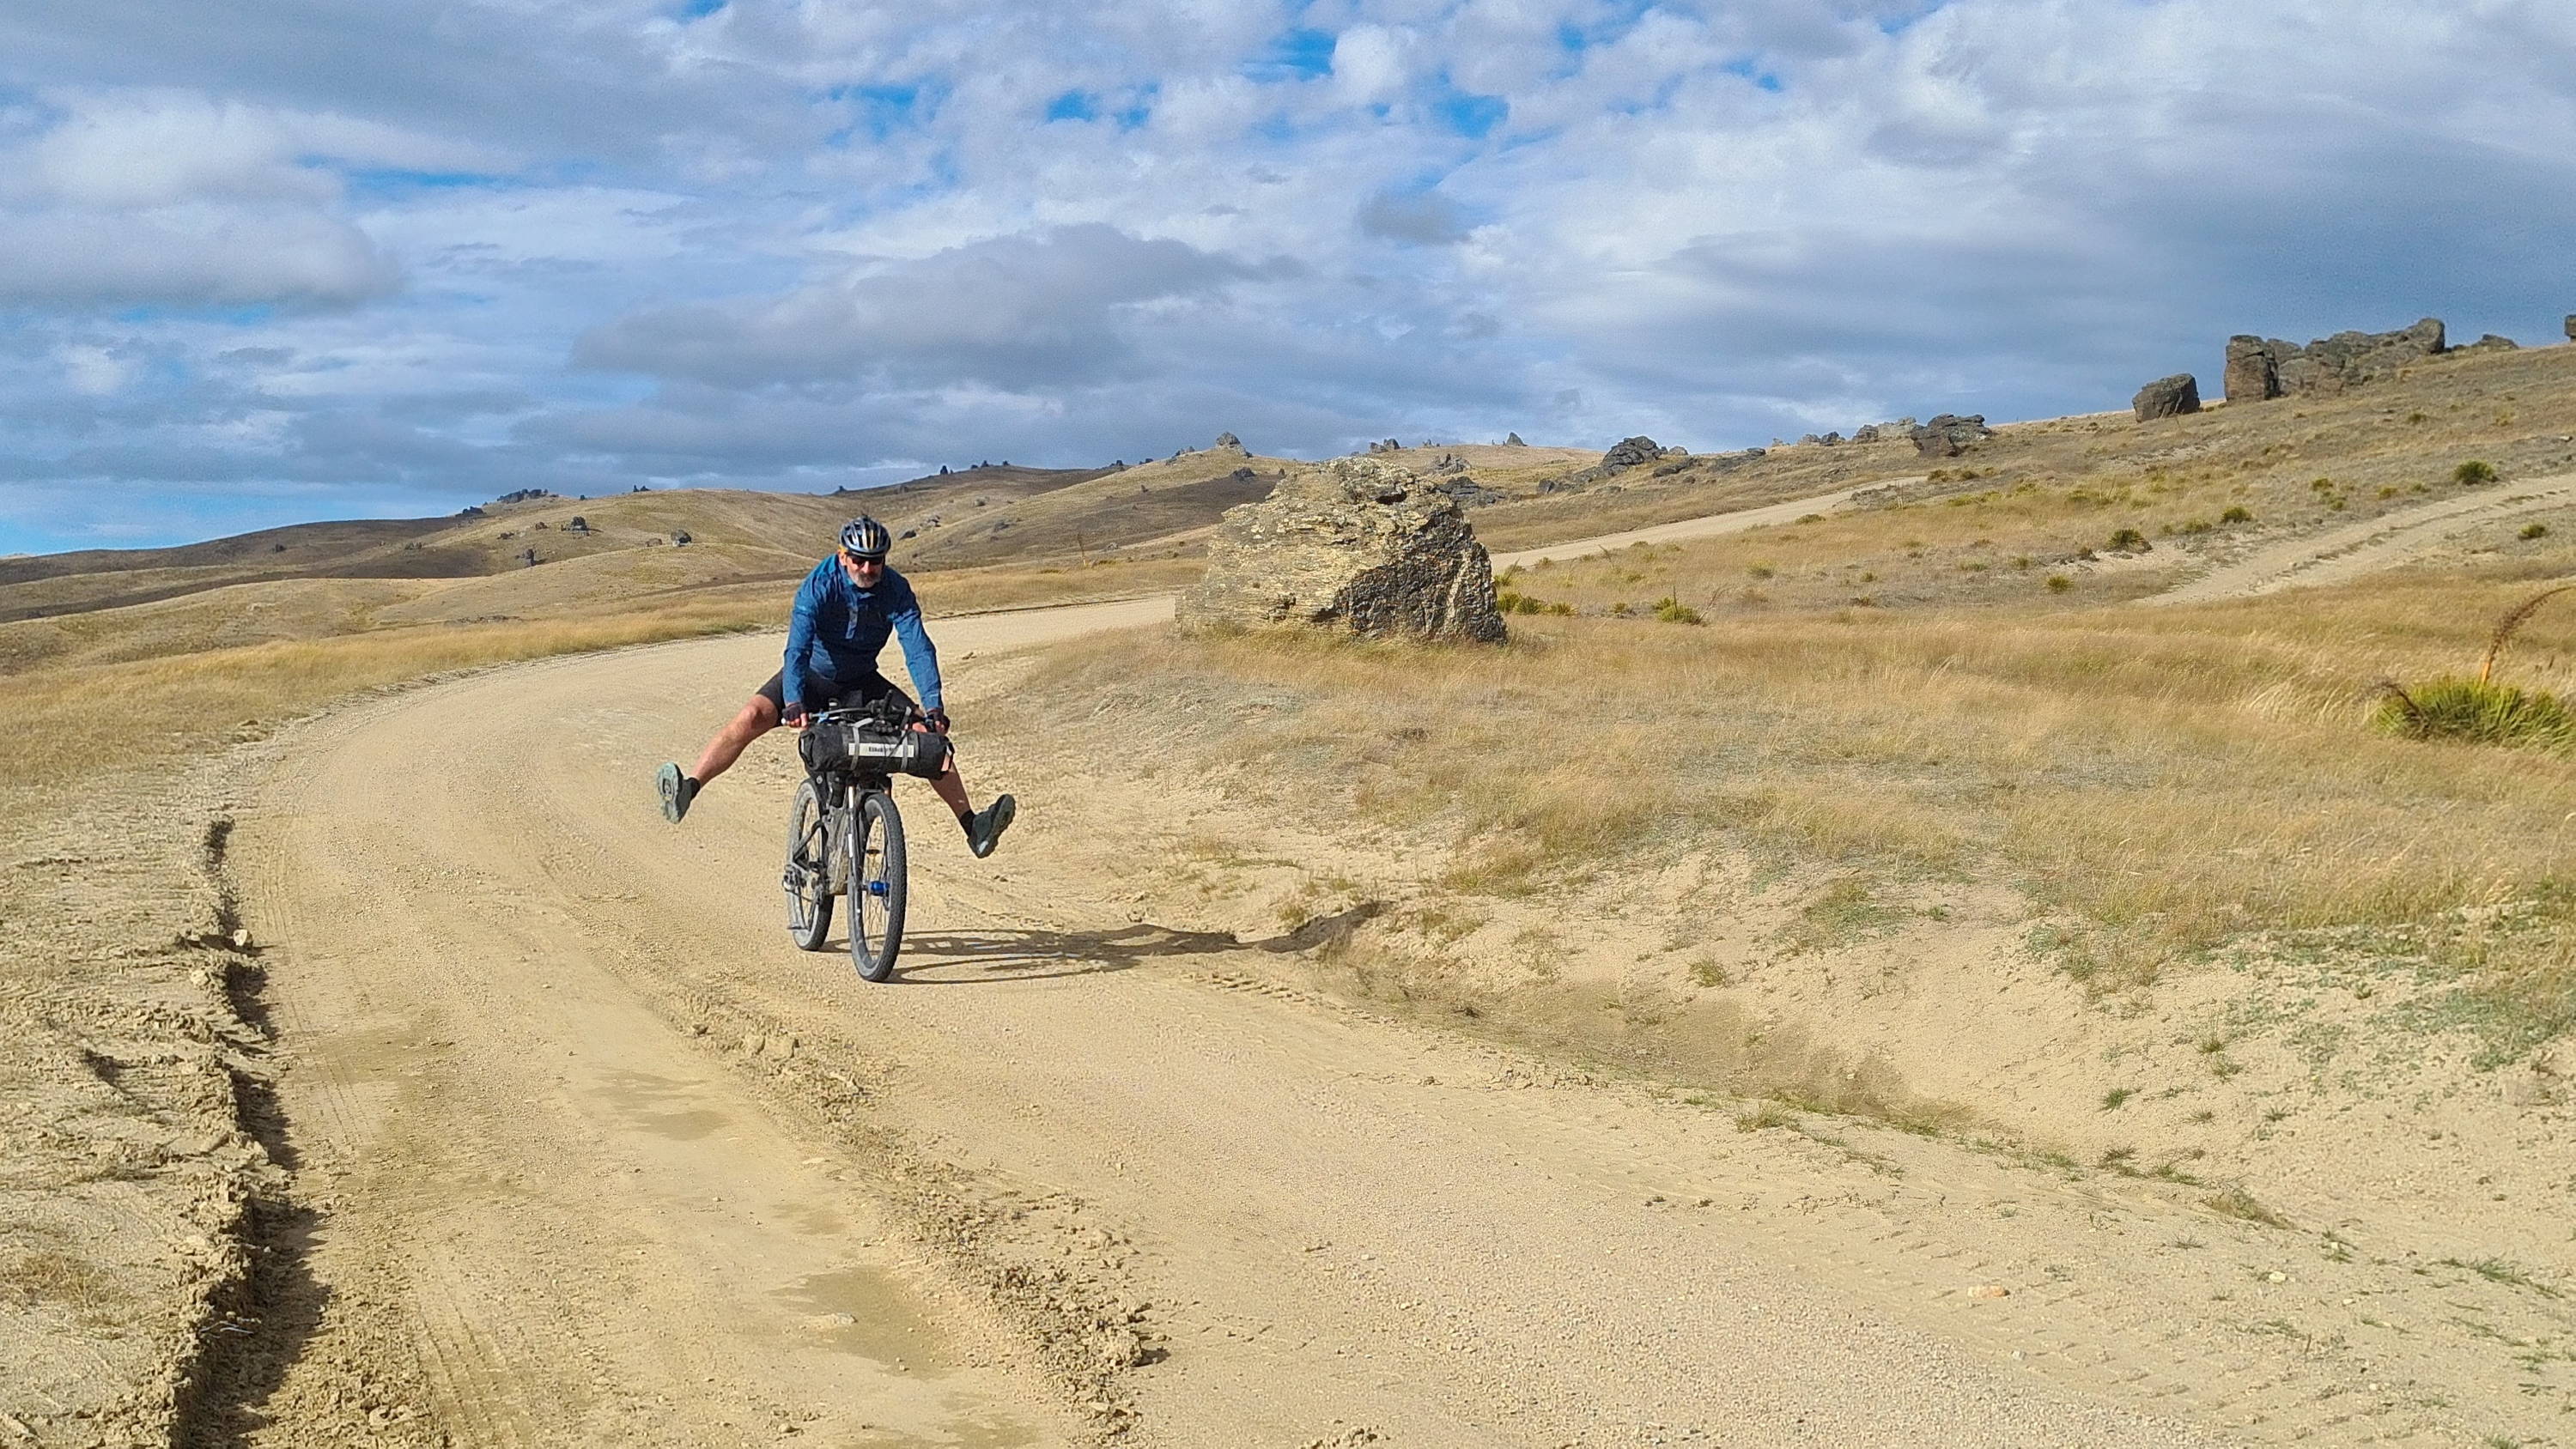 A cyclist rides down a sandy descent with both feet off the bike's pedals.